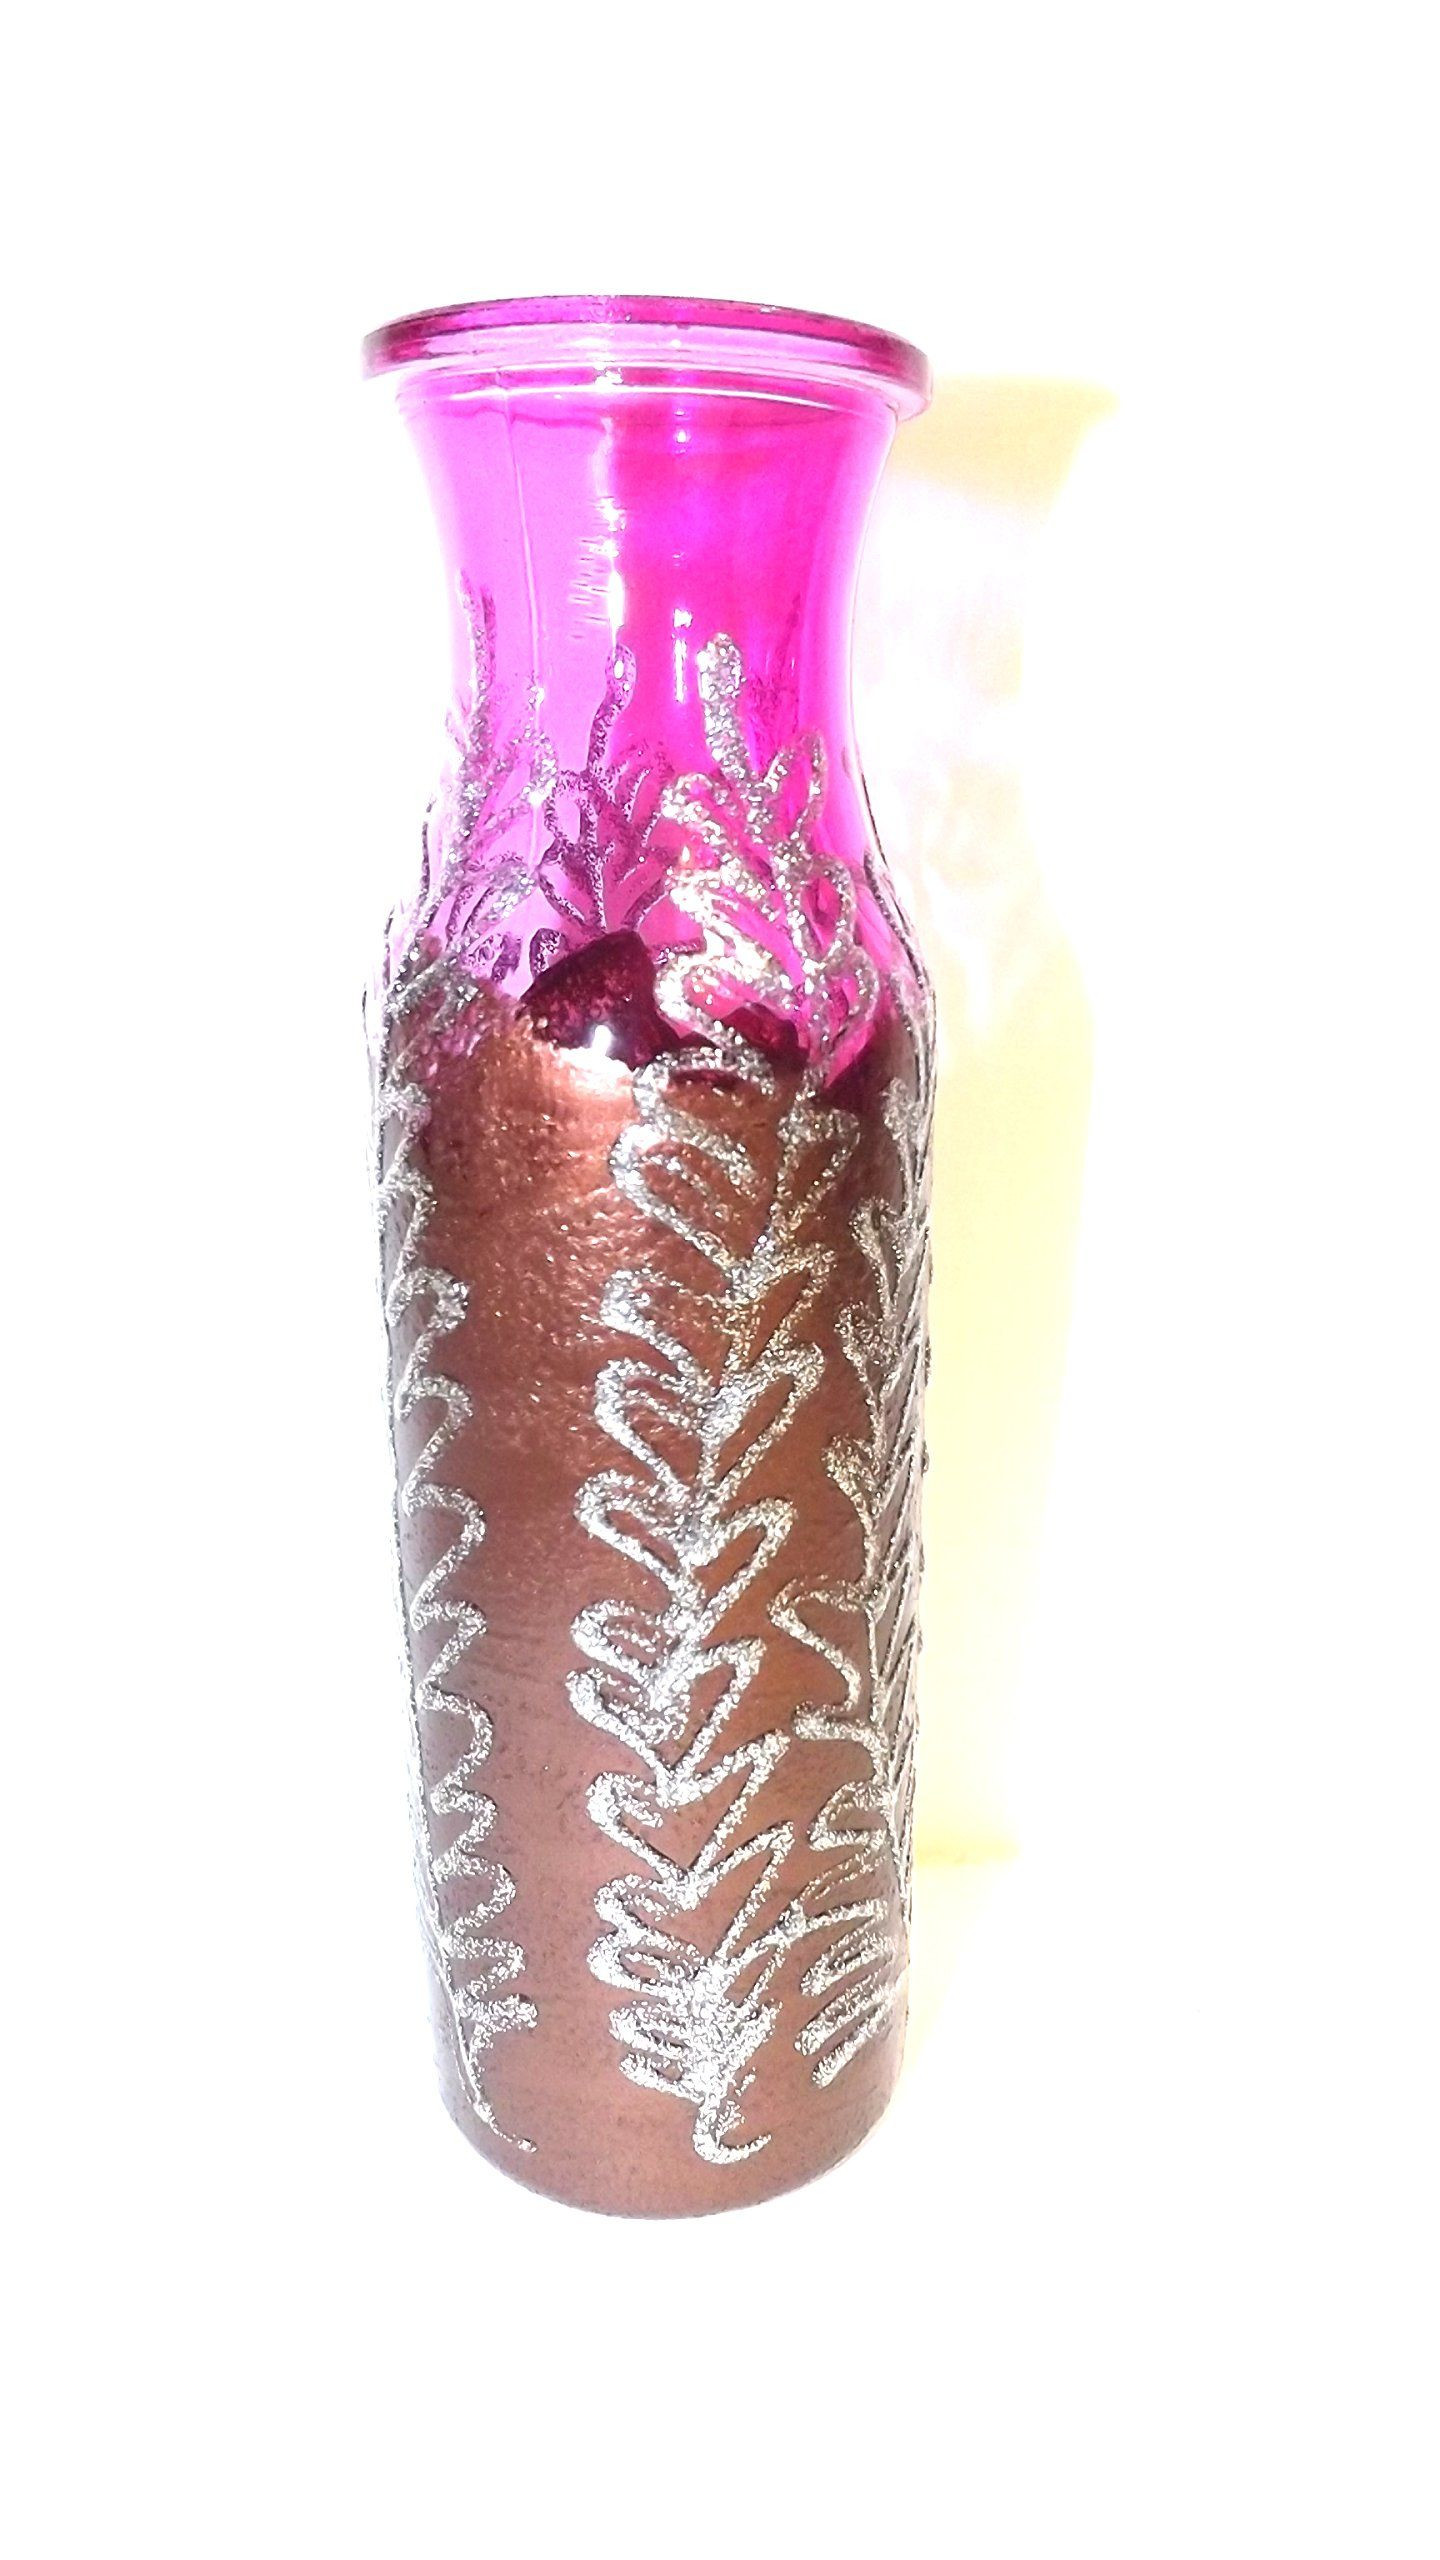 26 Lovely Engraved Vases Wedding 2024 free download engraved vases wedding of pink and bronze sparkly vase beautiful hand painted vase vases within pink and bronze sparkly vase beautiful hand painted vase